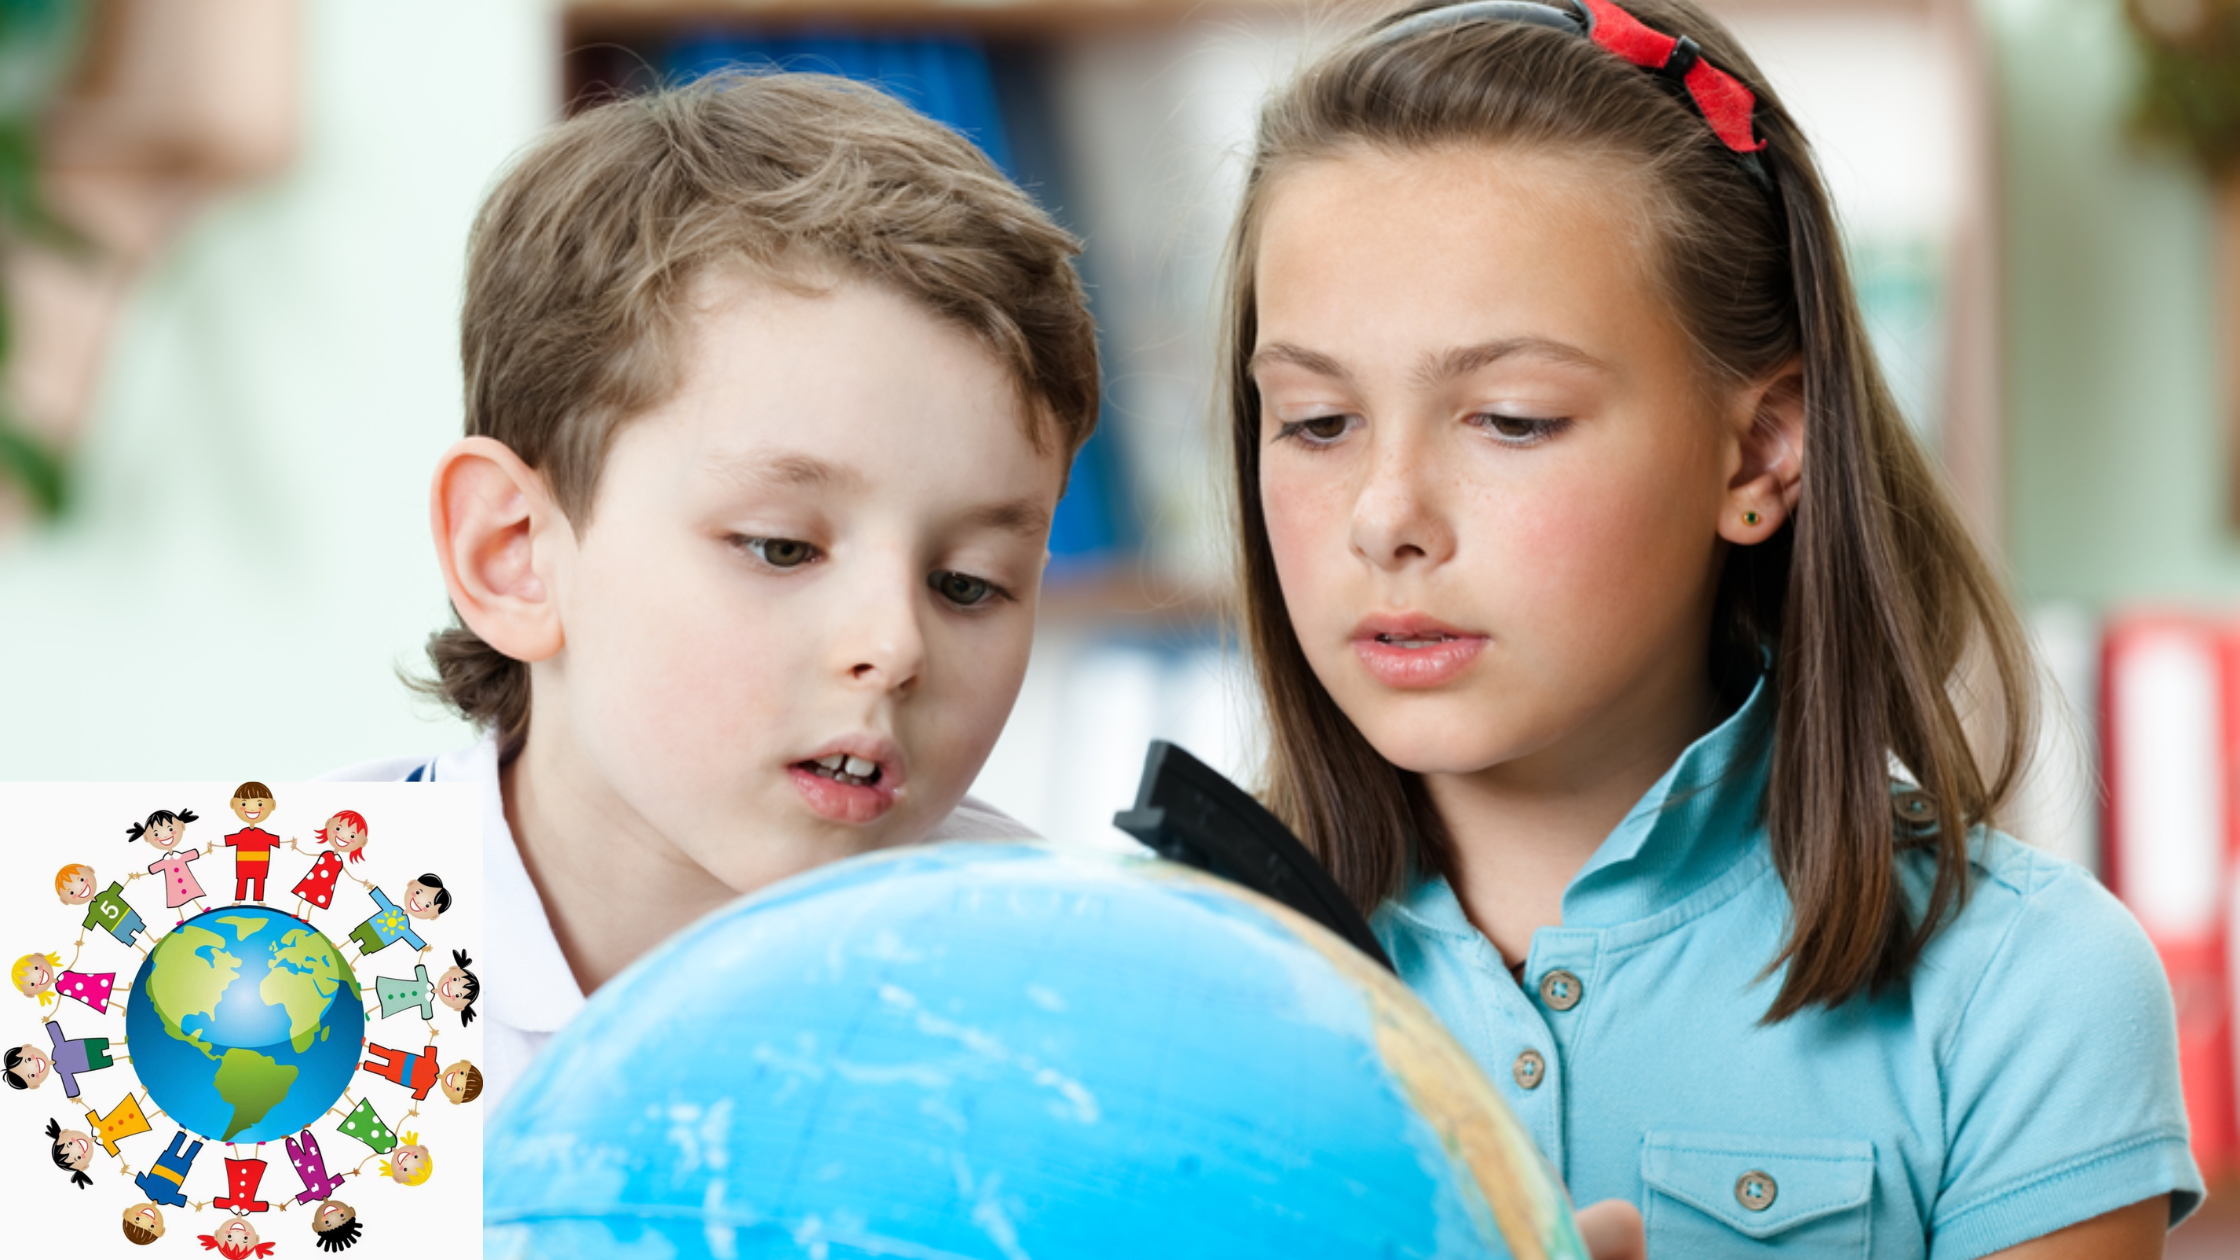 Teaching Global Citizenship to Elementary Students